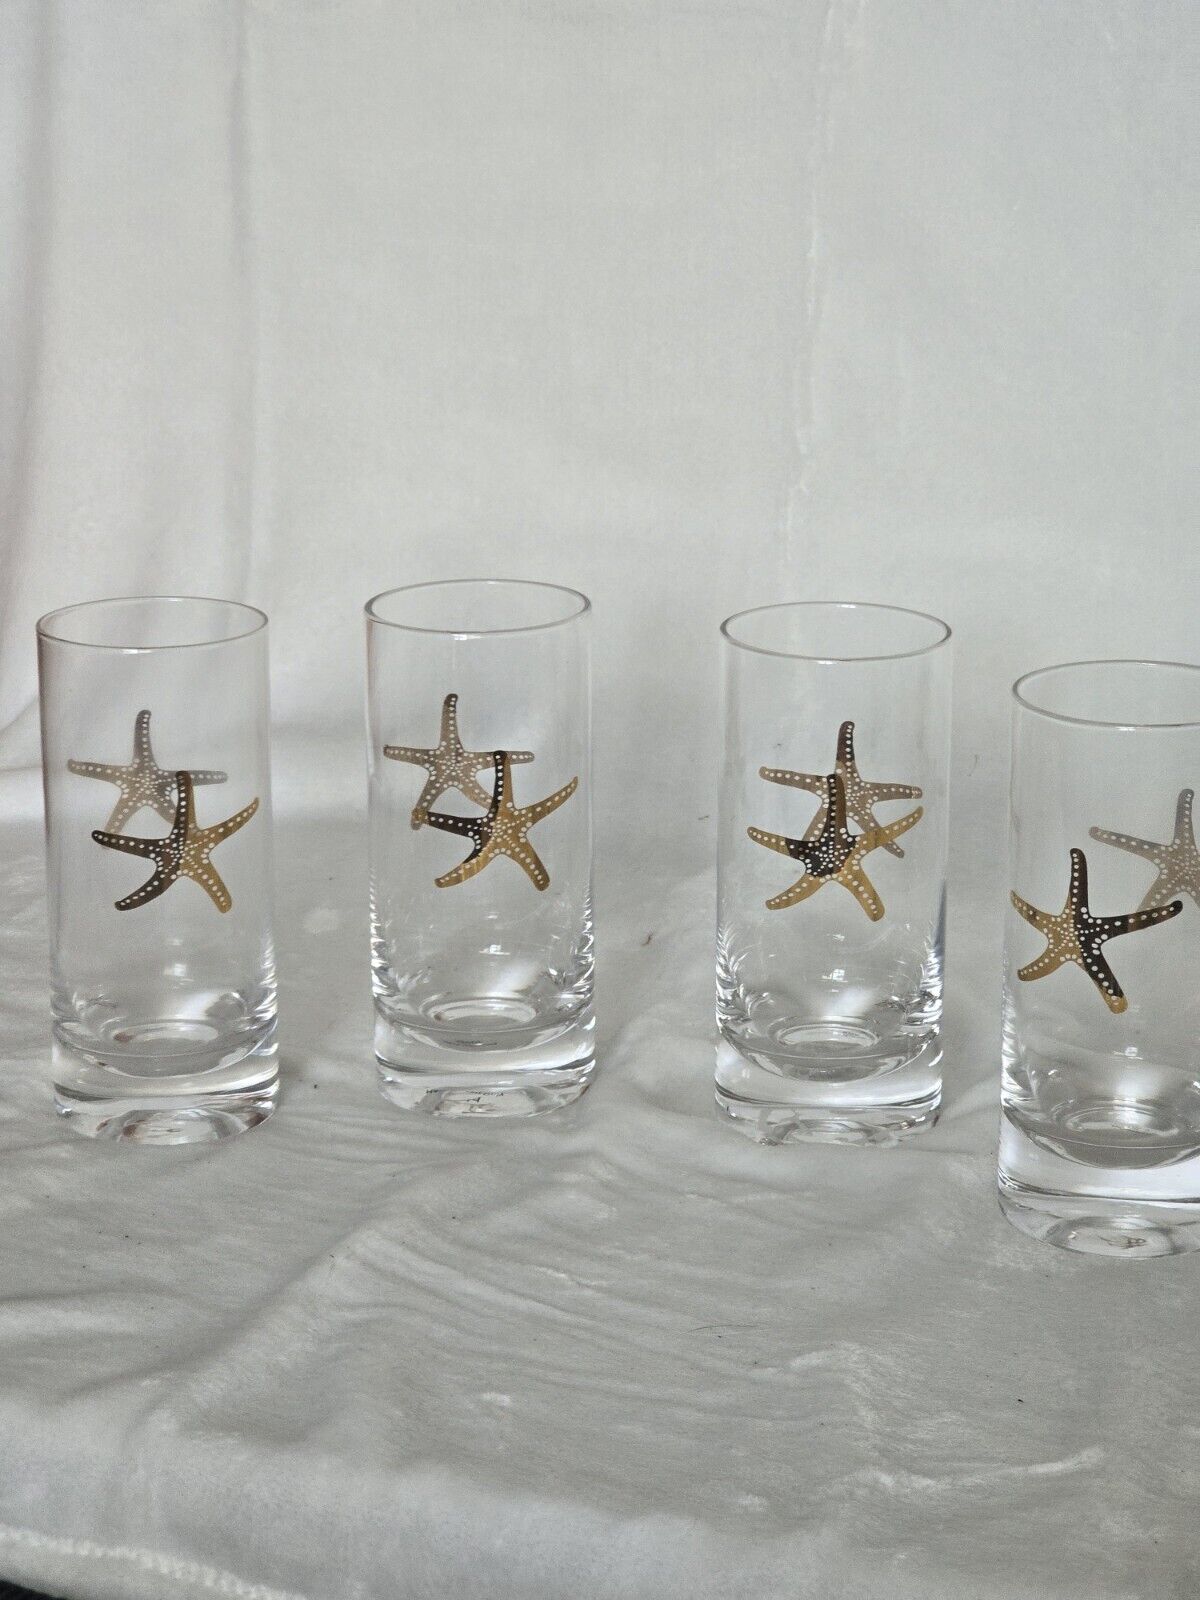 Tall Heavy Bottom Glasses Clear with  Real Gold Starfish Designs Set of 4